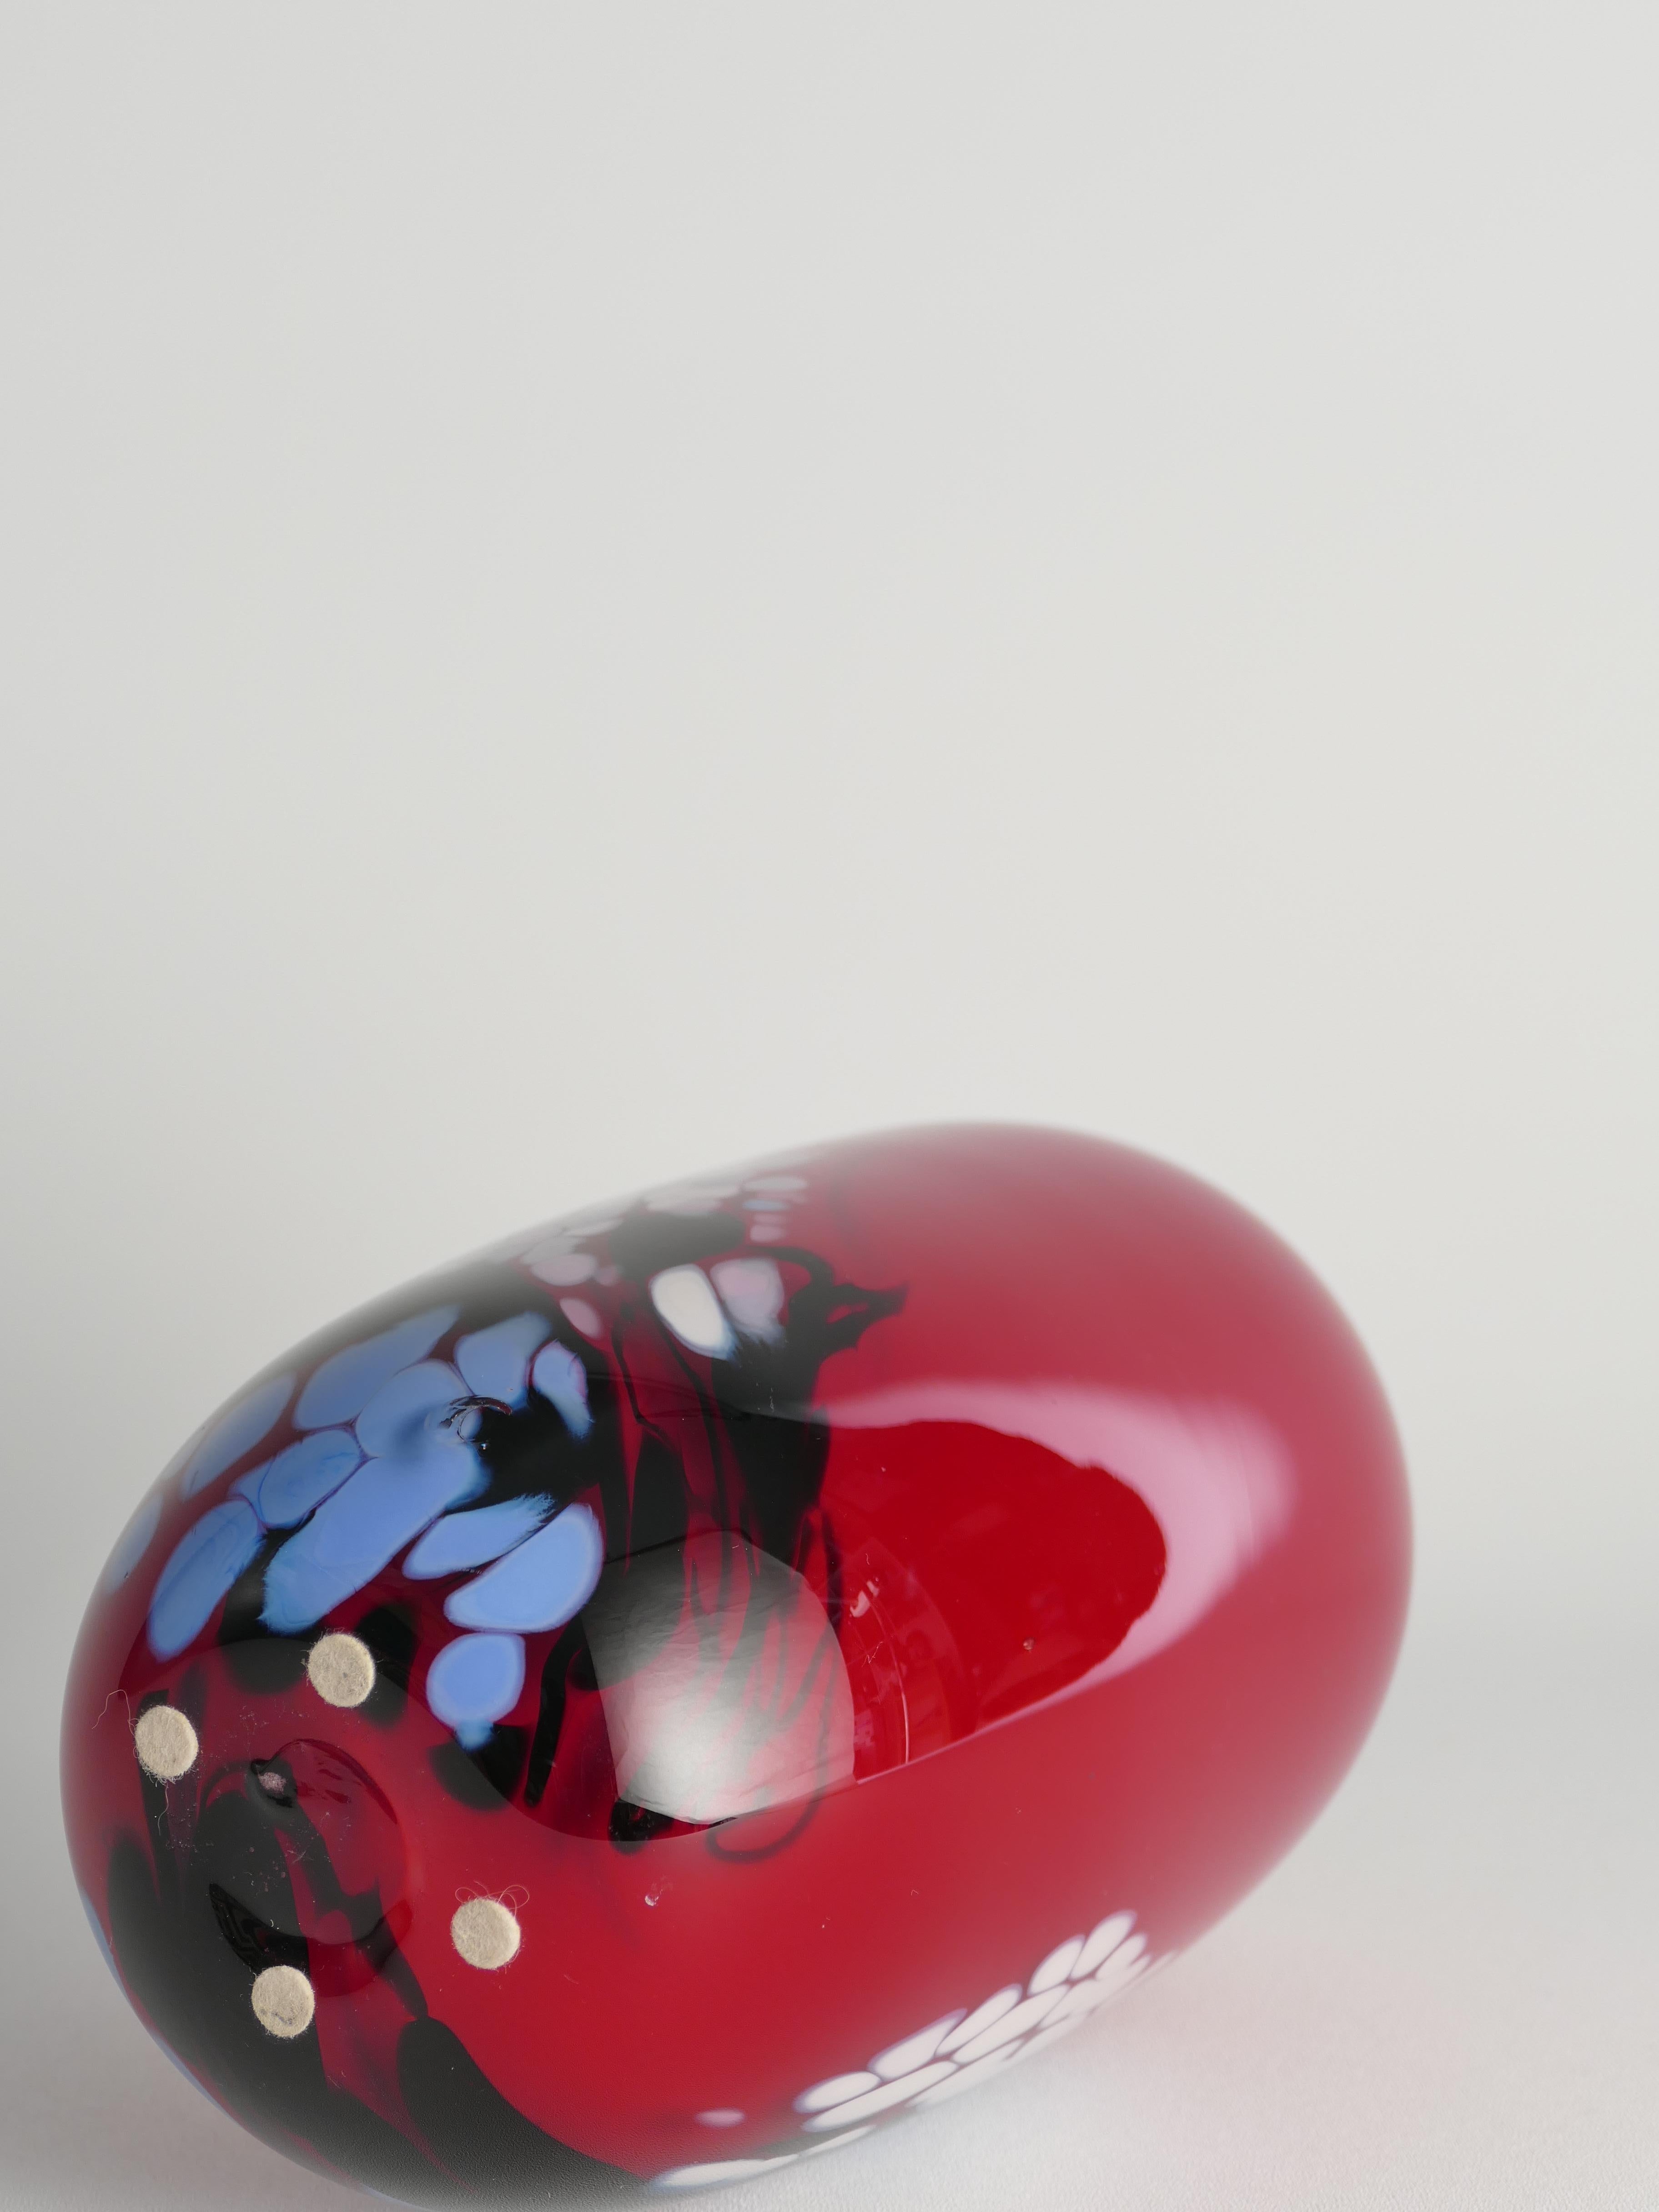 Unique Cherry Red Art Glass Vase by Mikael Axenbrant, Sweden 1990 For Sale 10